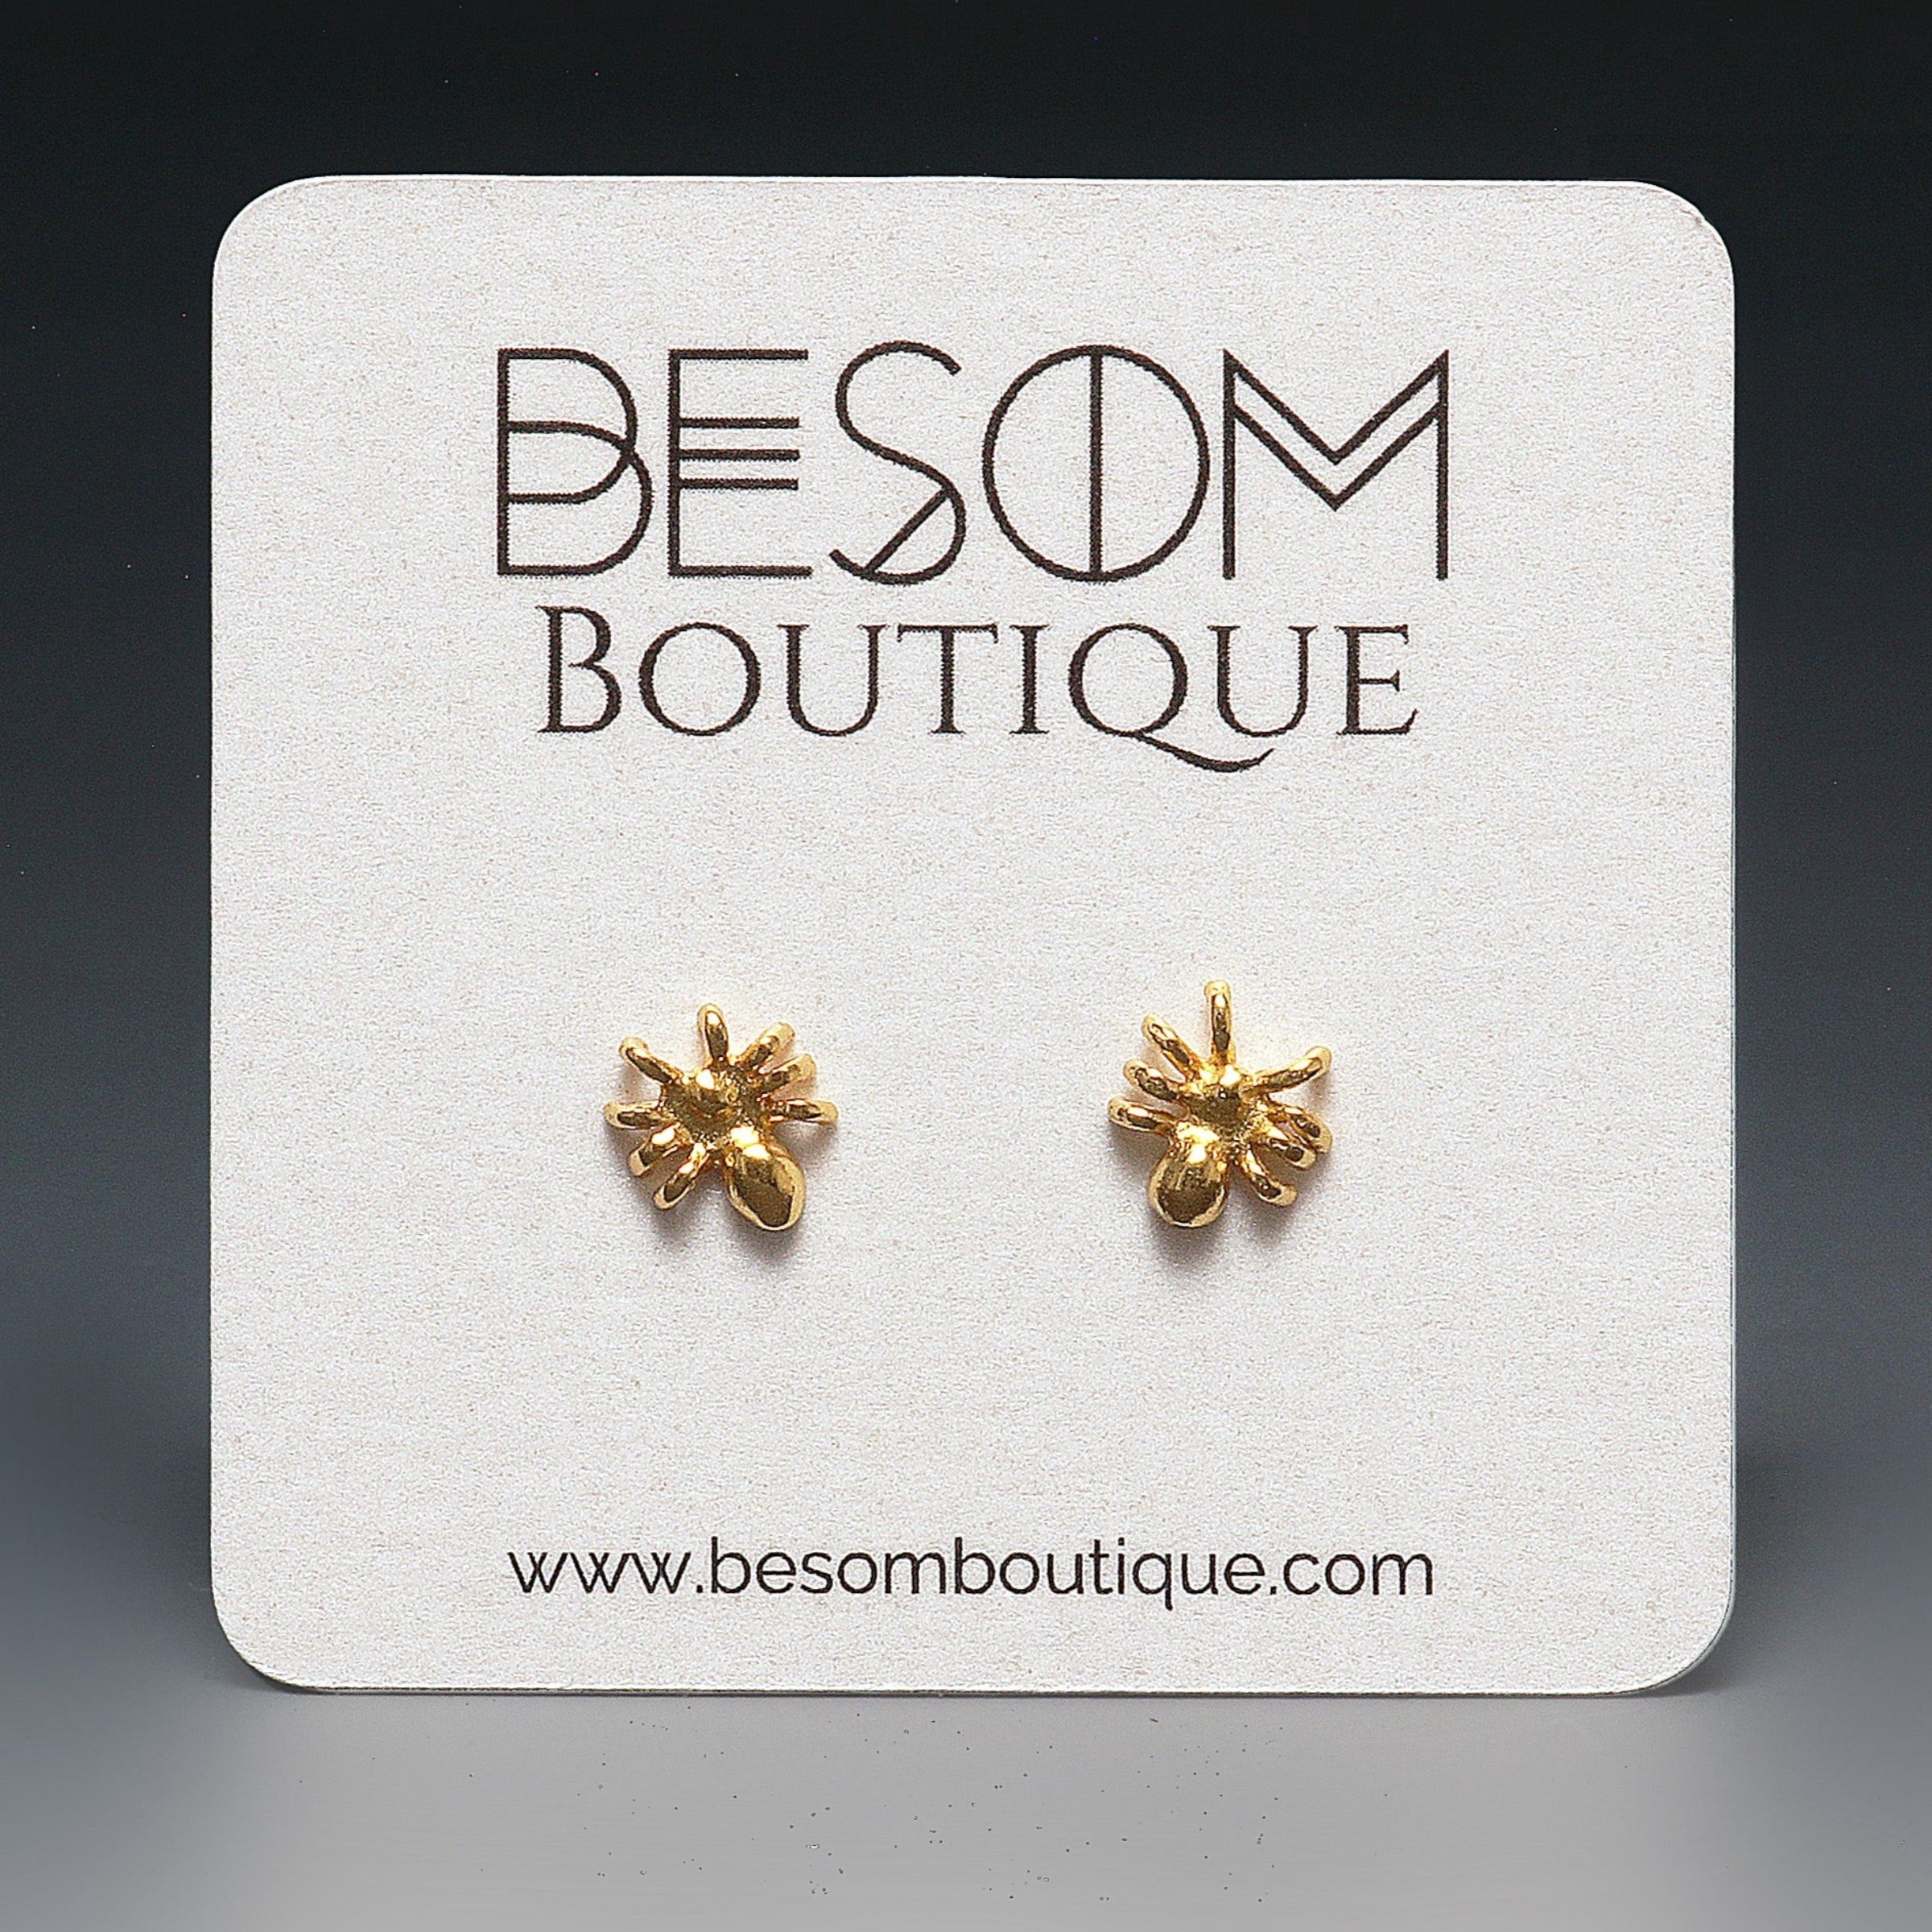 Spider Stud Earrings in Gold Besom Boutique